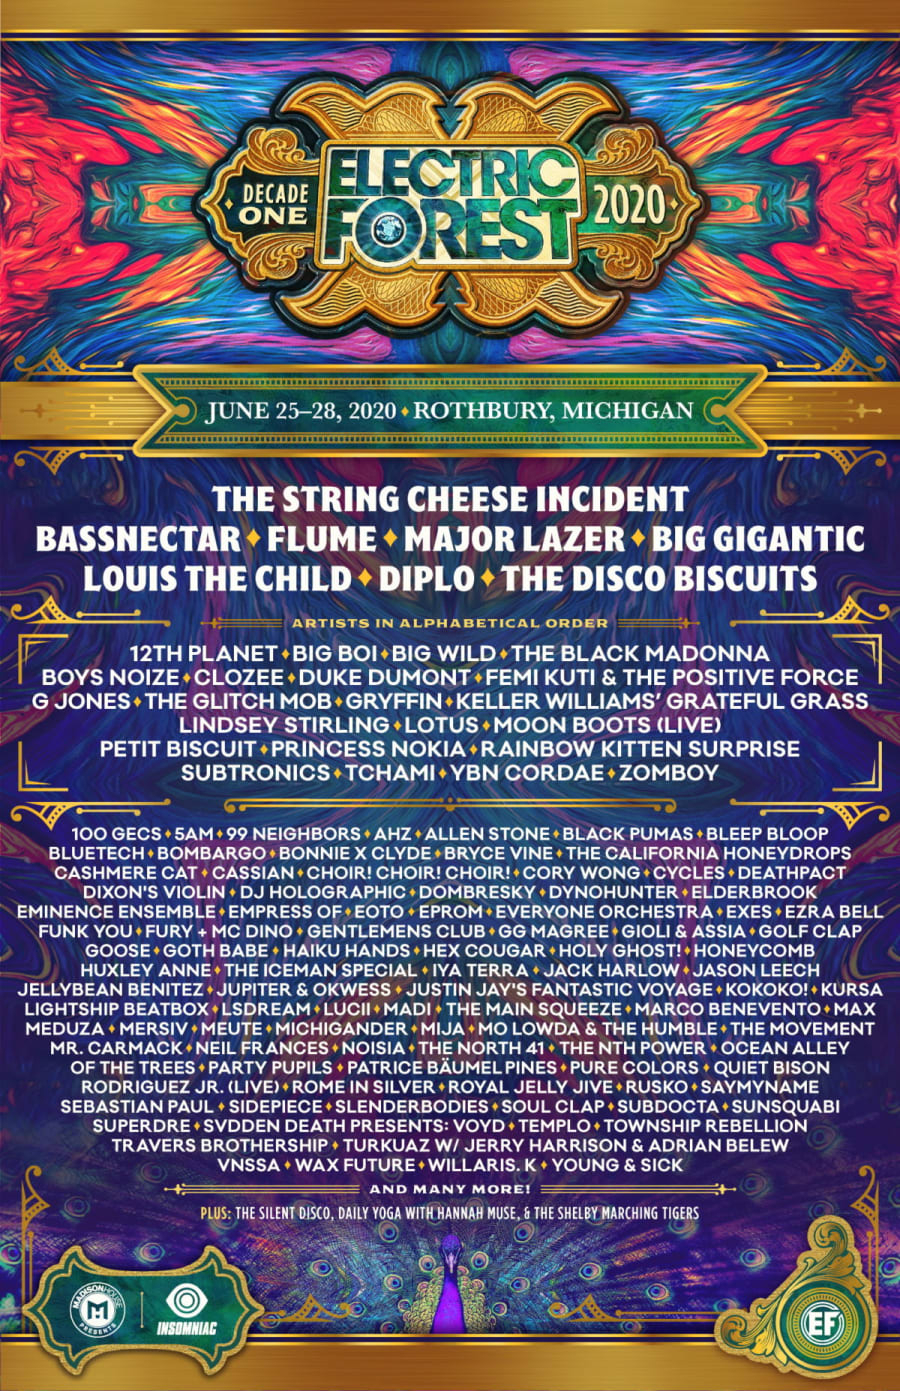 Electric Forest Festival 2020 Lineup of Flume, Major Lazer, and